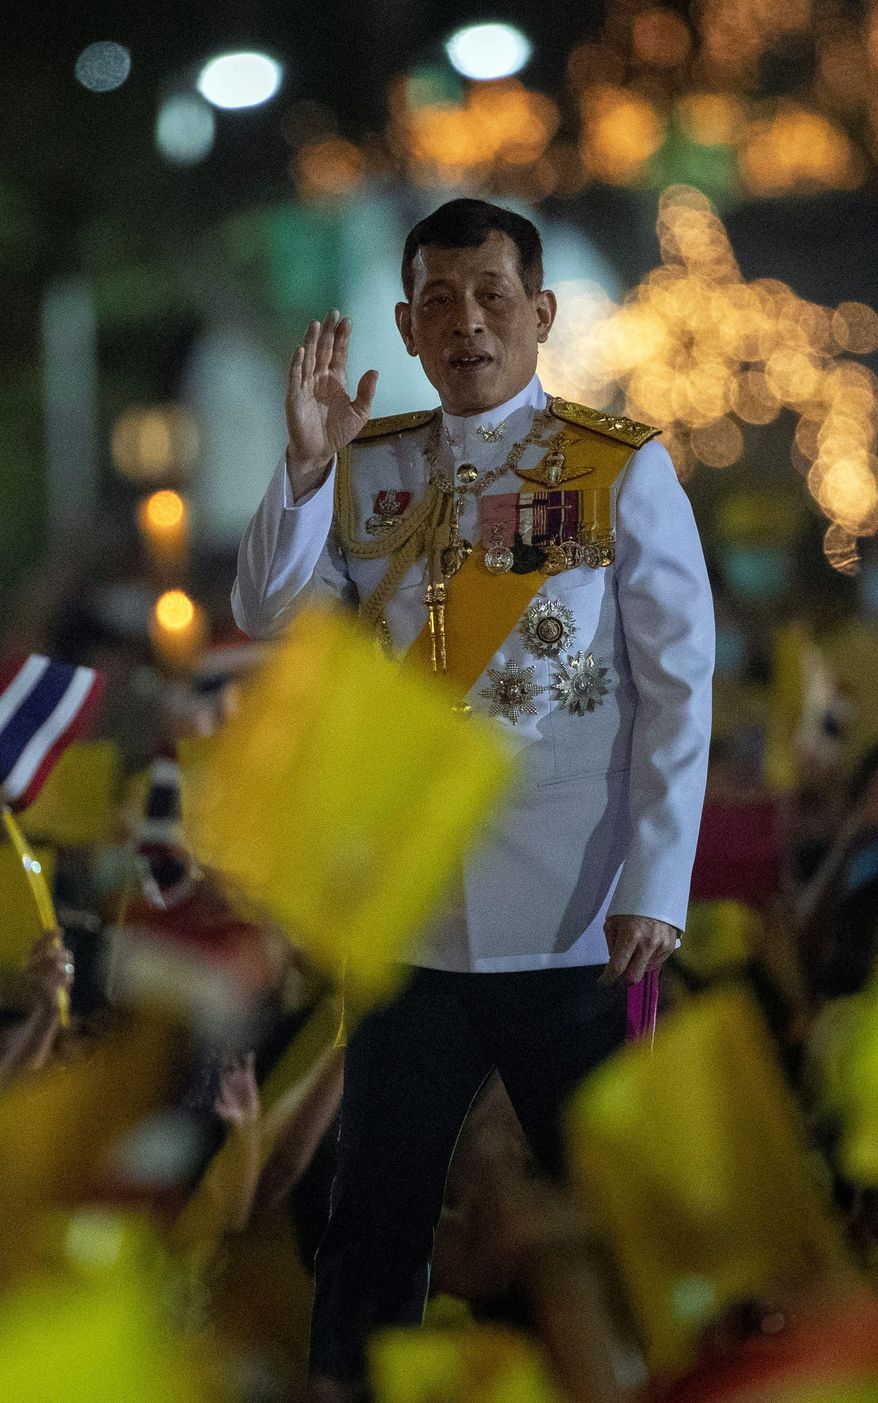 Thai King Maha Vajiralongkorn, 68, faces a balancing act to maintain his position of strength during 2021 while trying to adapt to an increasingly international public spotlight.
greets supporters as he walks to participate in a candle lighting ceremony to mark the anniversary of the birth of late King Bhumibol Adulyadej at Sanam Luang ceremonial ground in Bangkok, Thailand, Saturday, Dec. 5, 2020. Thousands of yellow-clad supporters greeted Thailand&#39;s king in Bangkok on Saturday as he led a birthday commemoration for his revered late father, the latest in a series of public appearances at a time of unprecedented challenge to the monarchy from student-led protesters.(AP Photo/Gemunu Amarasinghe) (ASSOCIATED PRESS PHOTOGRAPHS)